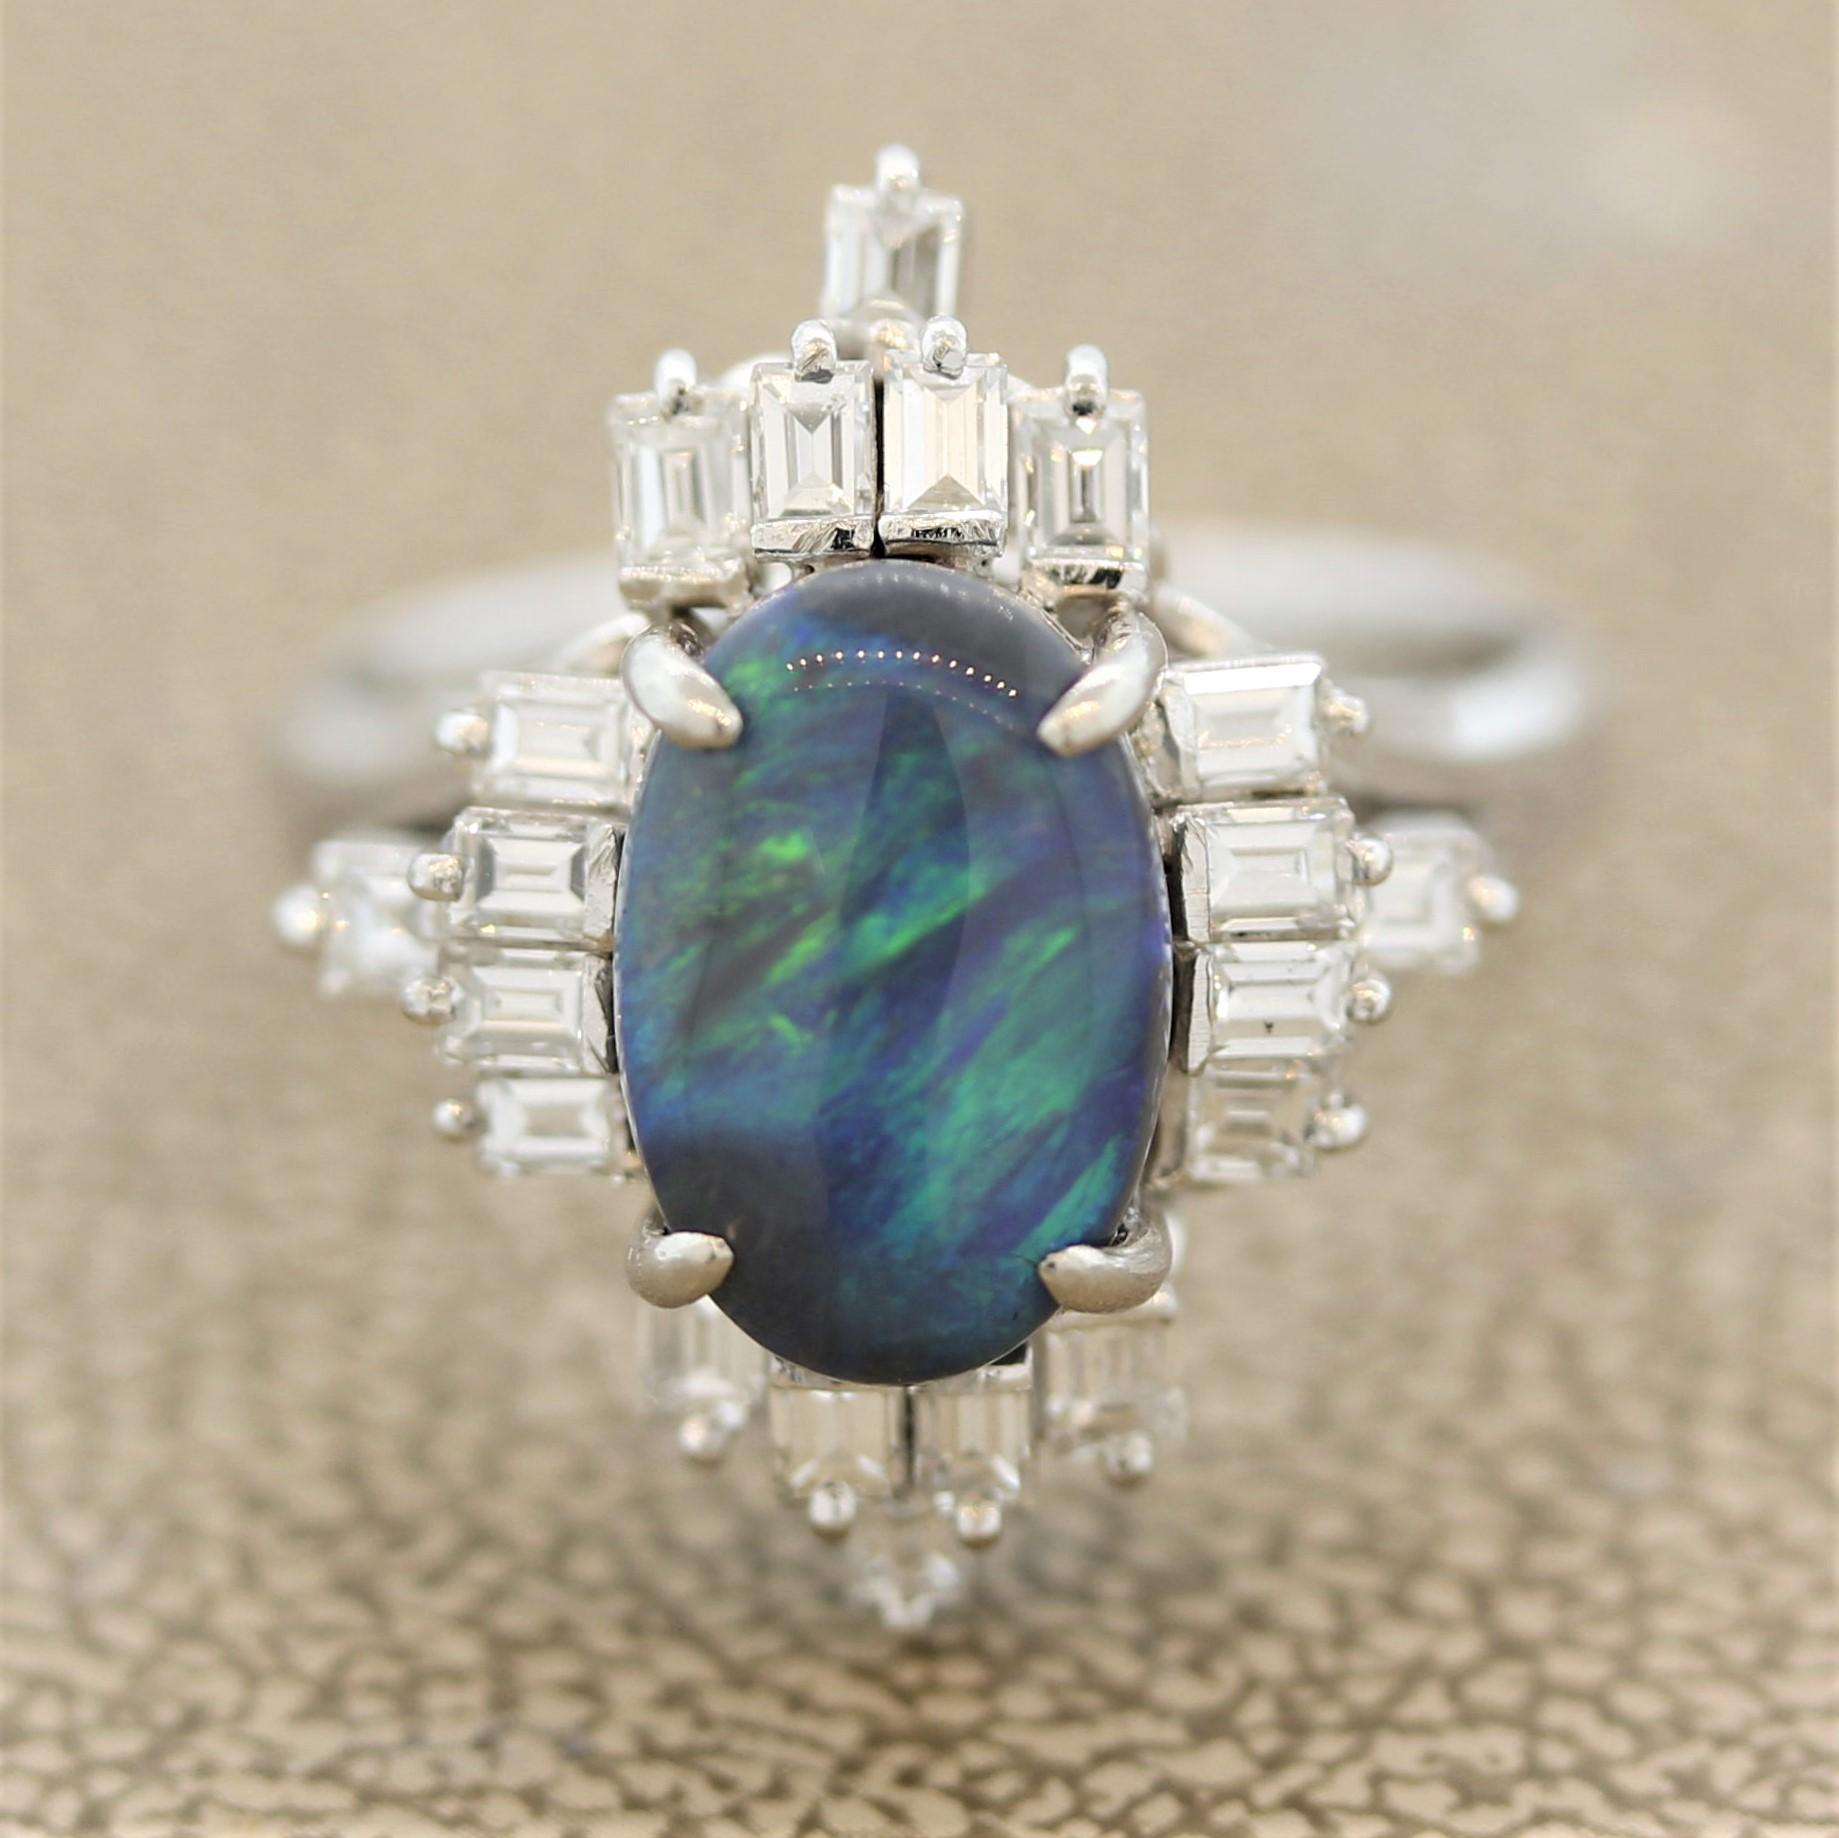 A sweet ring featuring a 2.20 carat natural black Australian opal. It has flashes of green and blue reminiscent of the northern lights. It is accented by 0.79 carats of fine baguette cut diamonds set around the opal. Hand-fabricated in a platinum